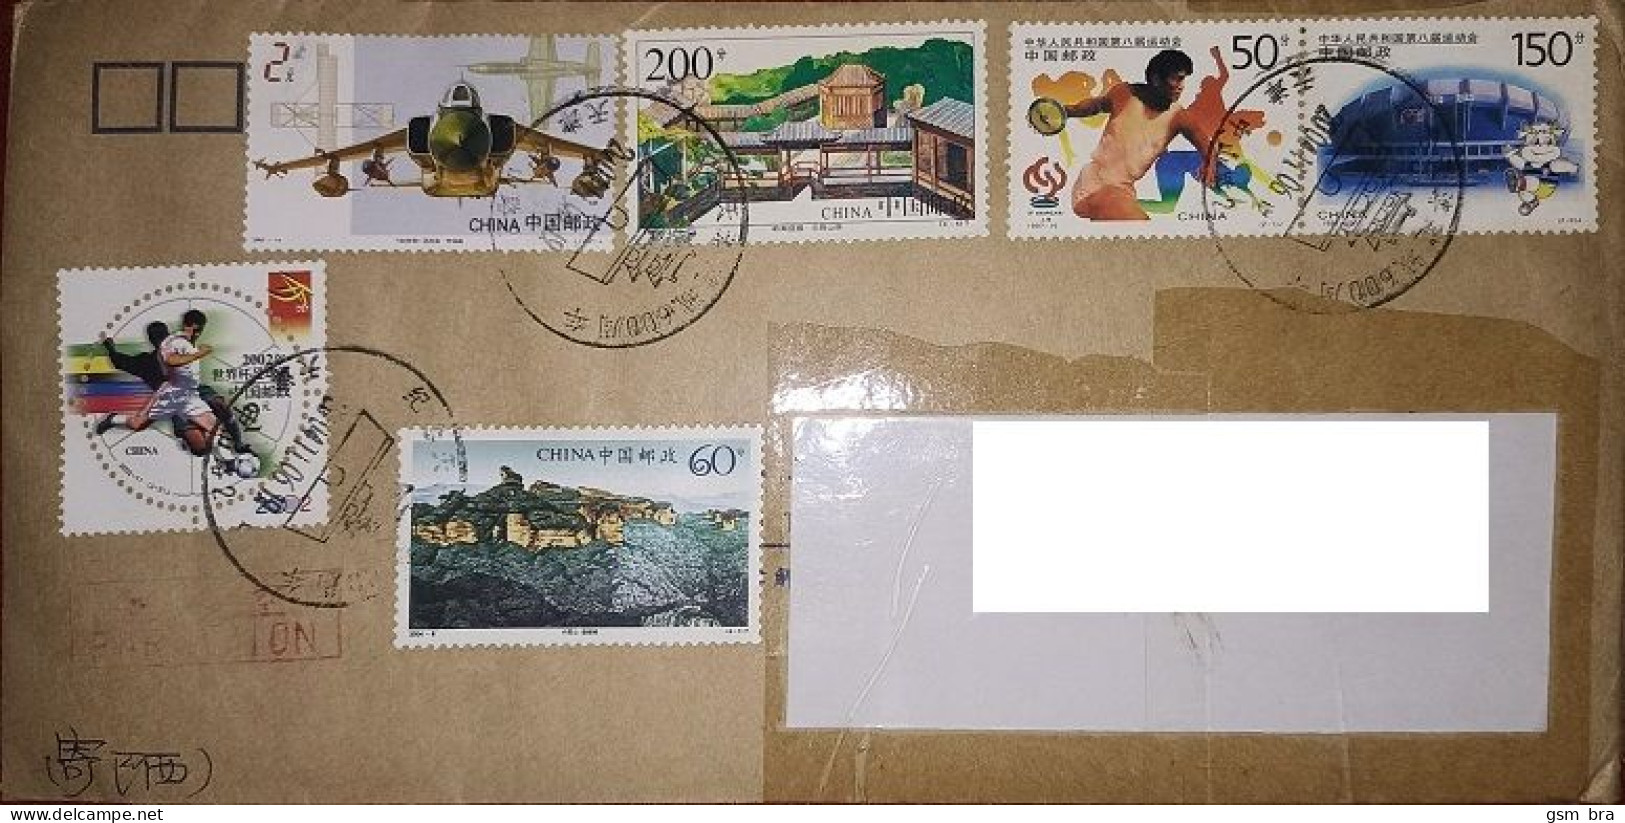 China (PR) 2004: Letter To Brazil - Chinese Architecture, Sports, Soccer, Aviation, Plane. - Lettres & Documents